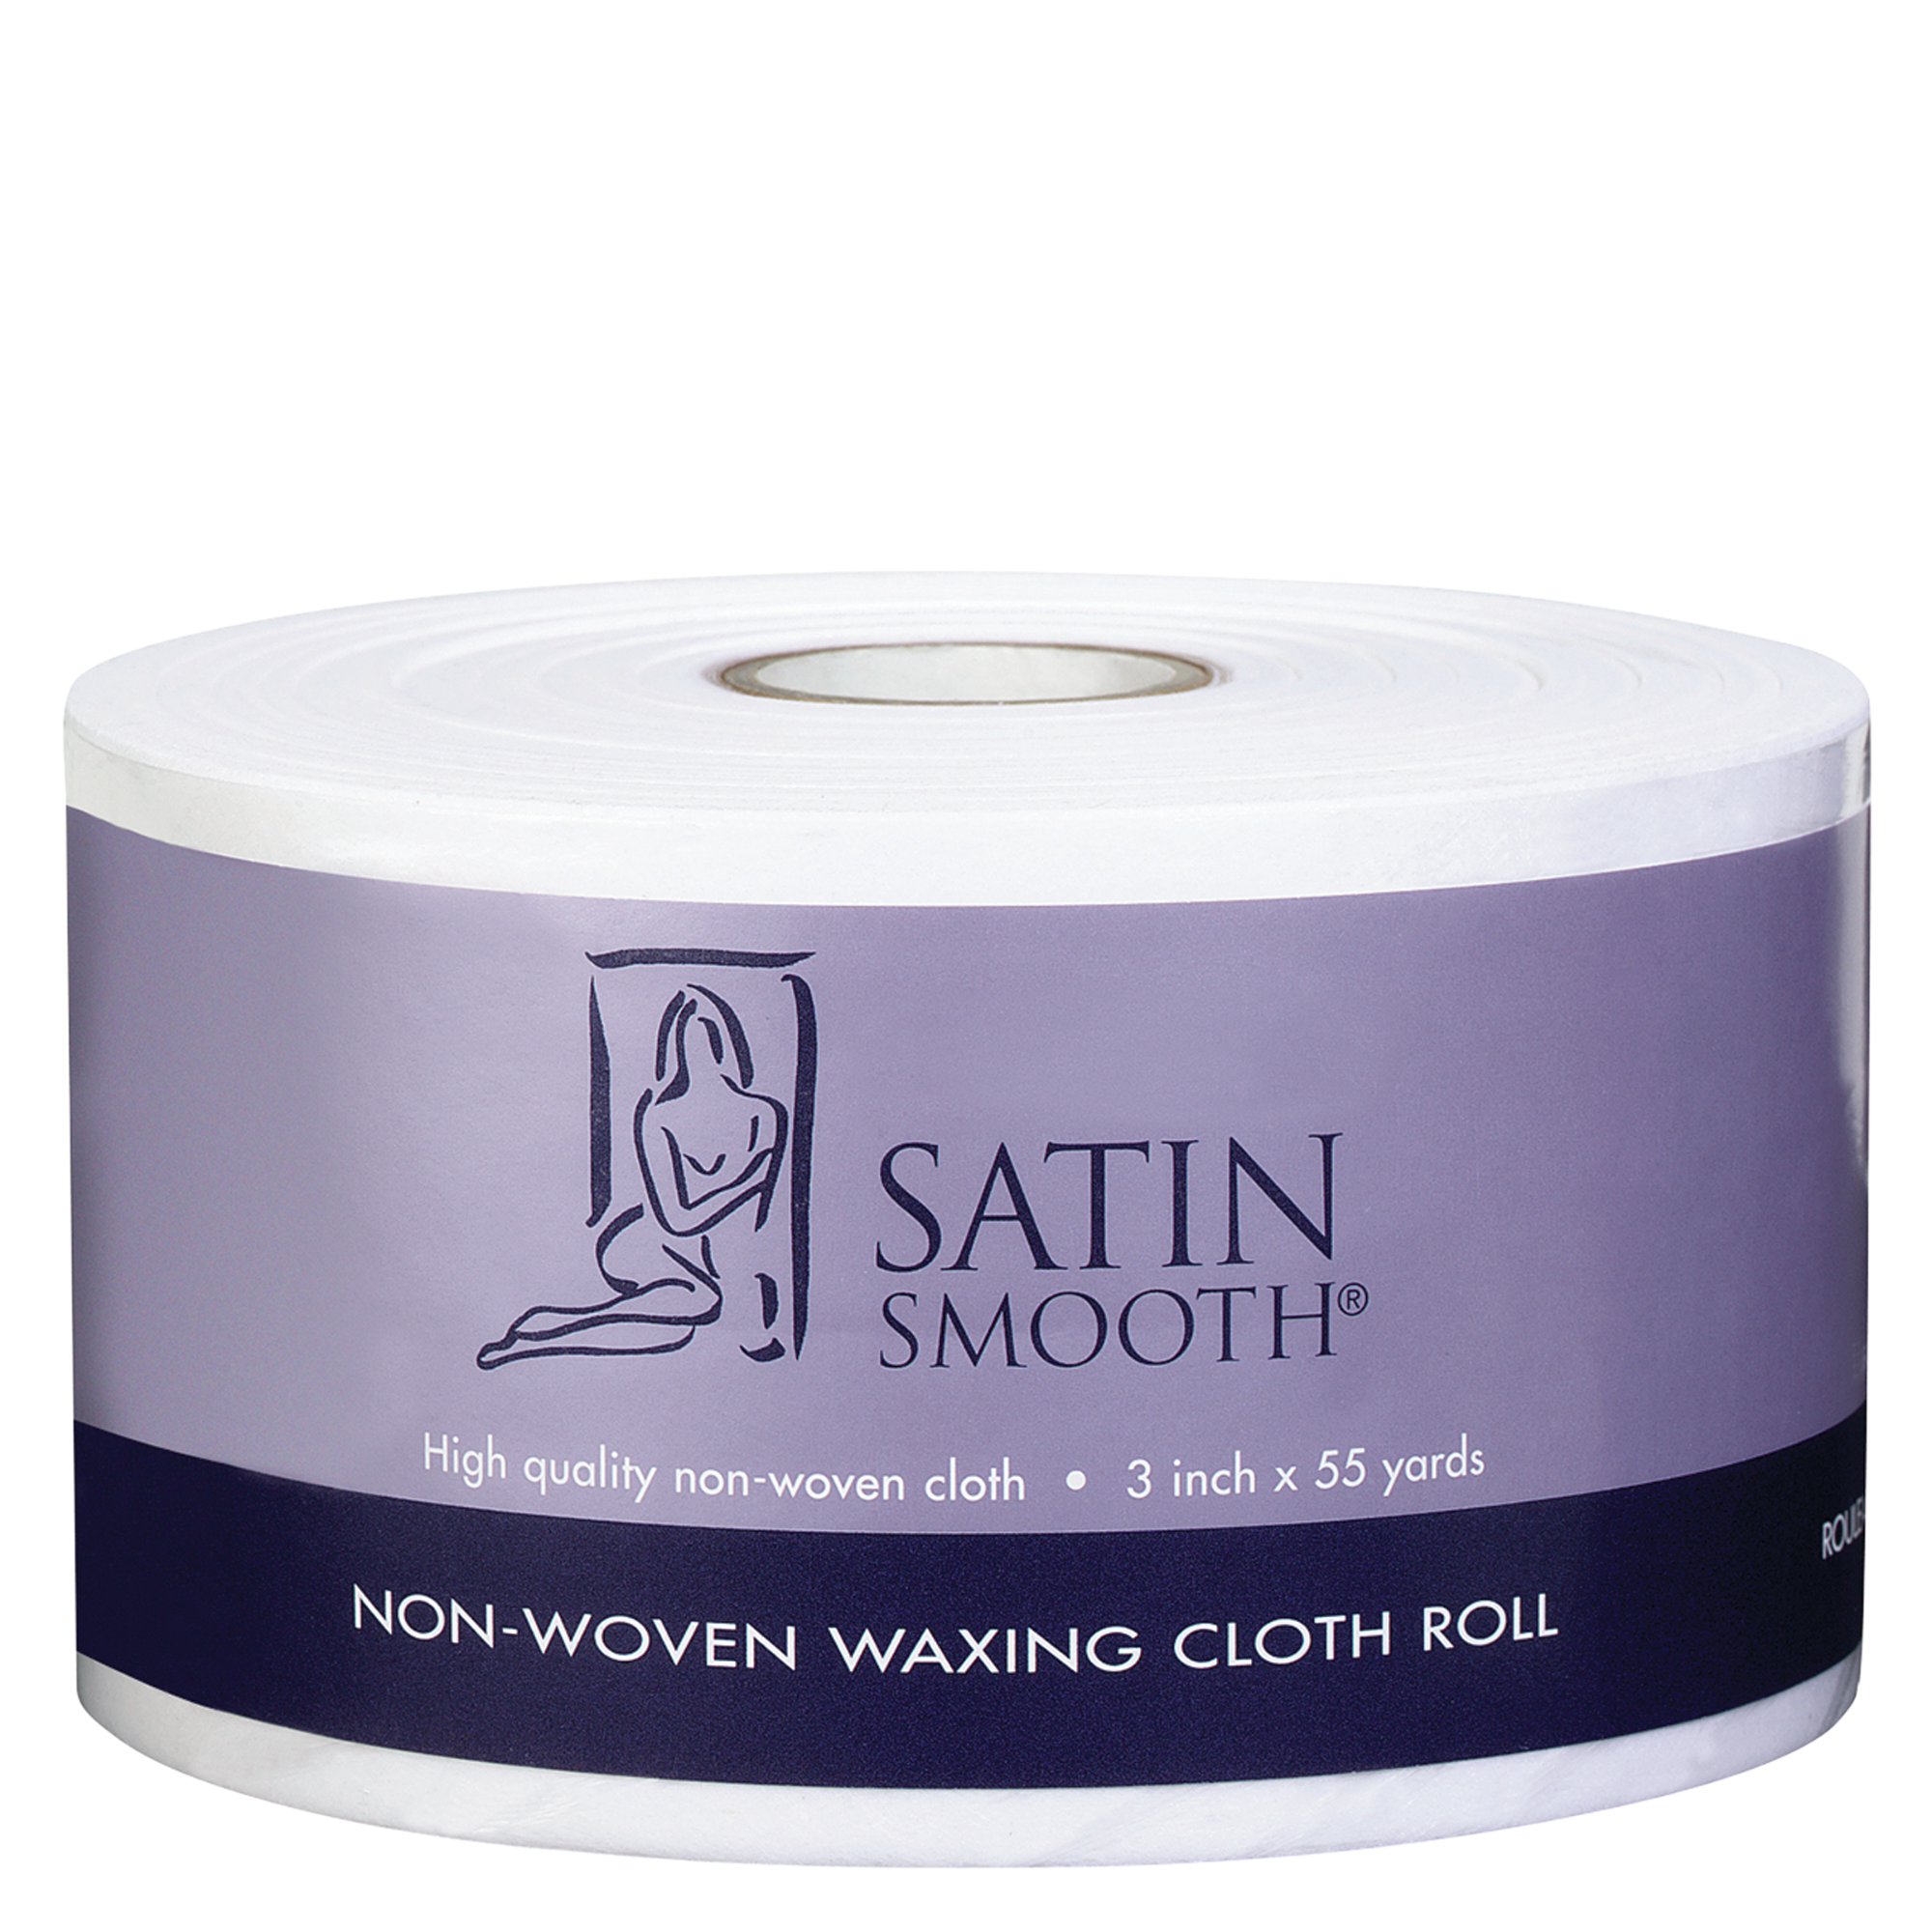 Non-Woven Waxing Cloth Roll - 55 yards